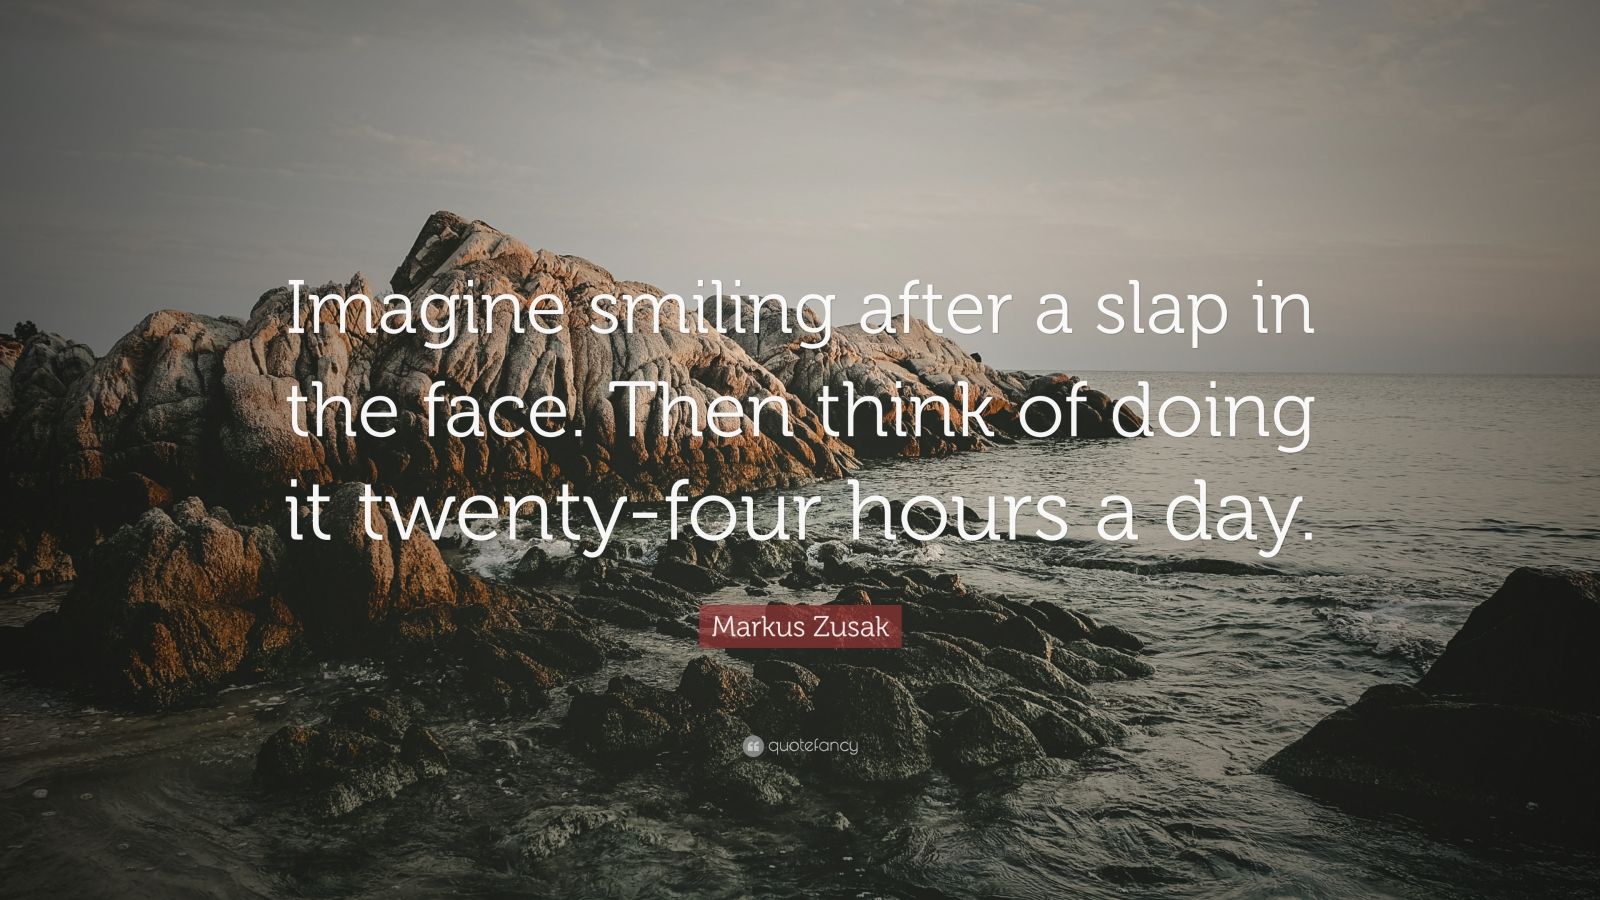 Slap In The Face Quote : Quotes In The Face Slap. QuotesGram : And if